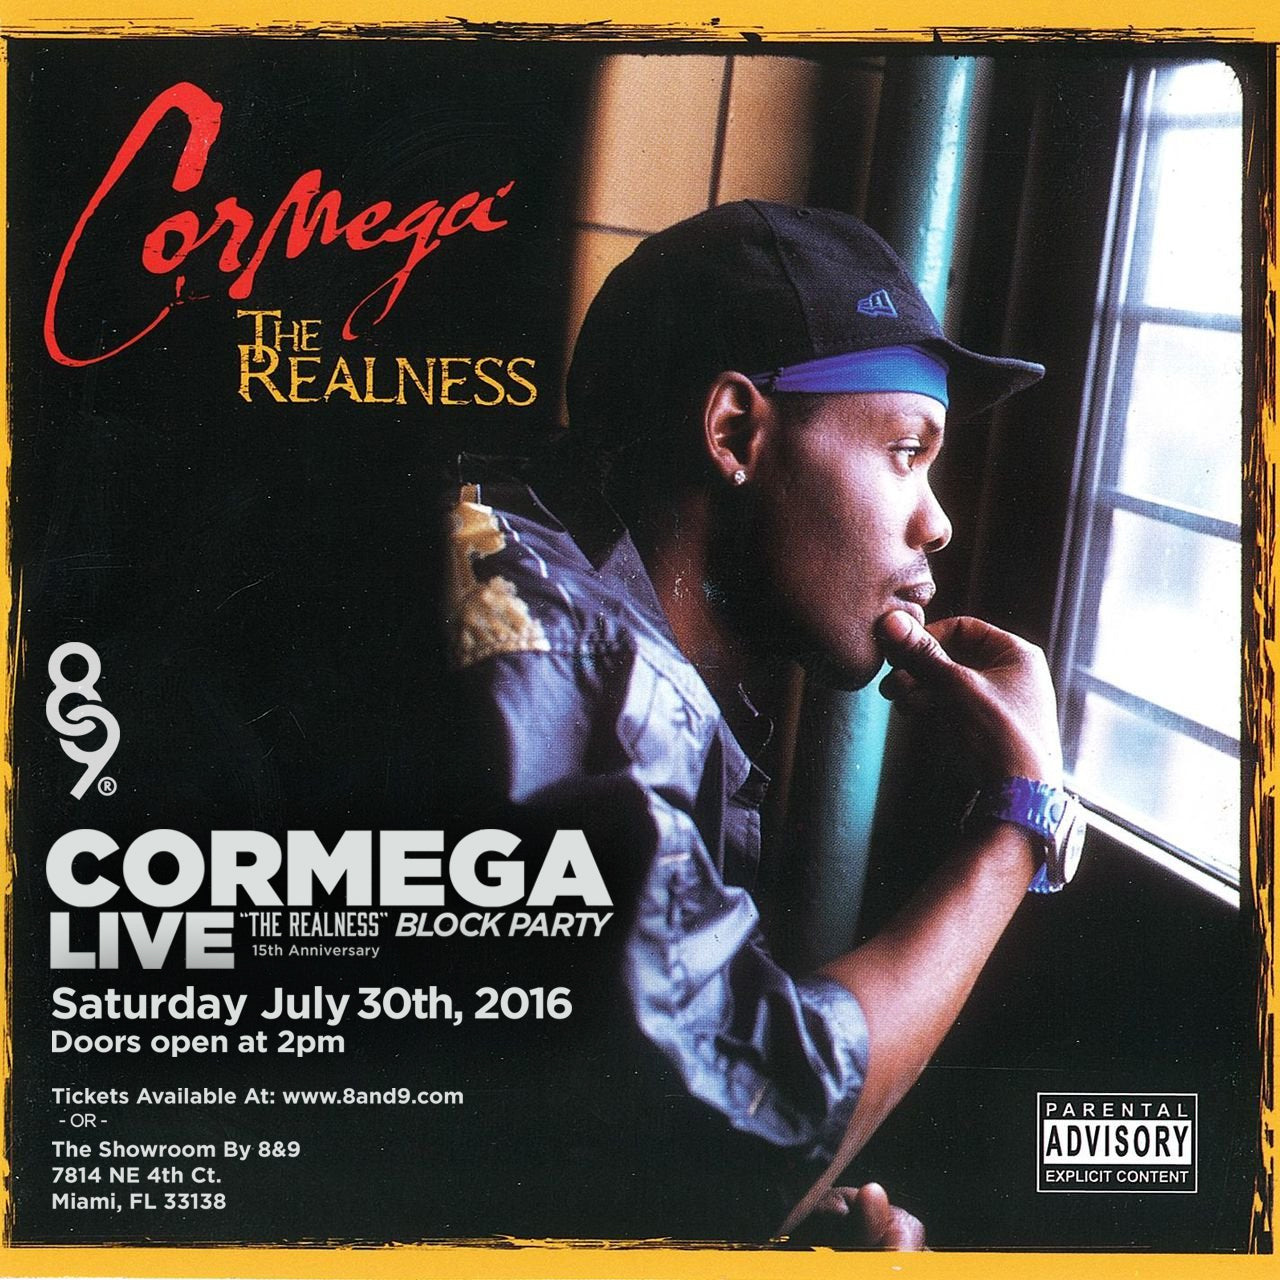  Cormega's 15th Anniversary of "The Realness" Block Party